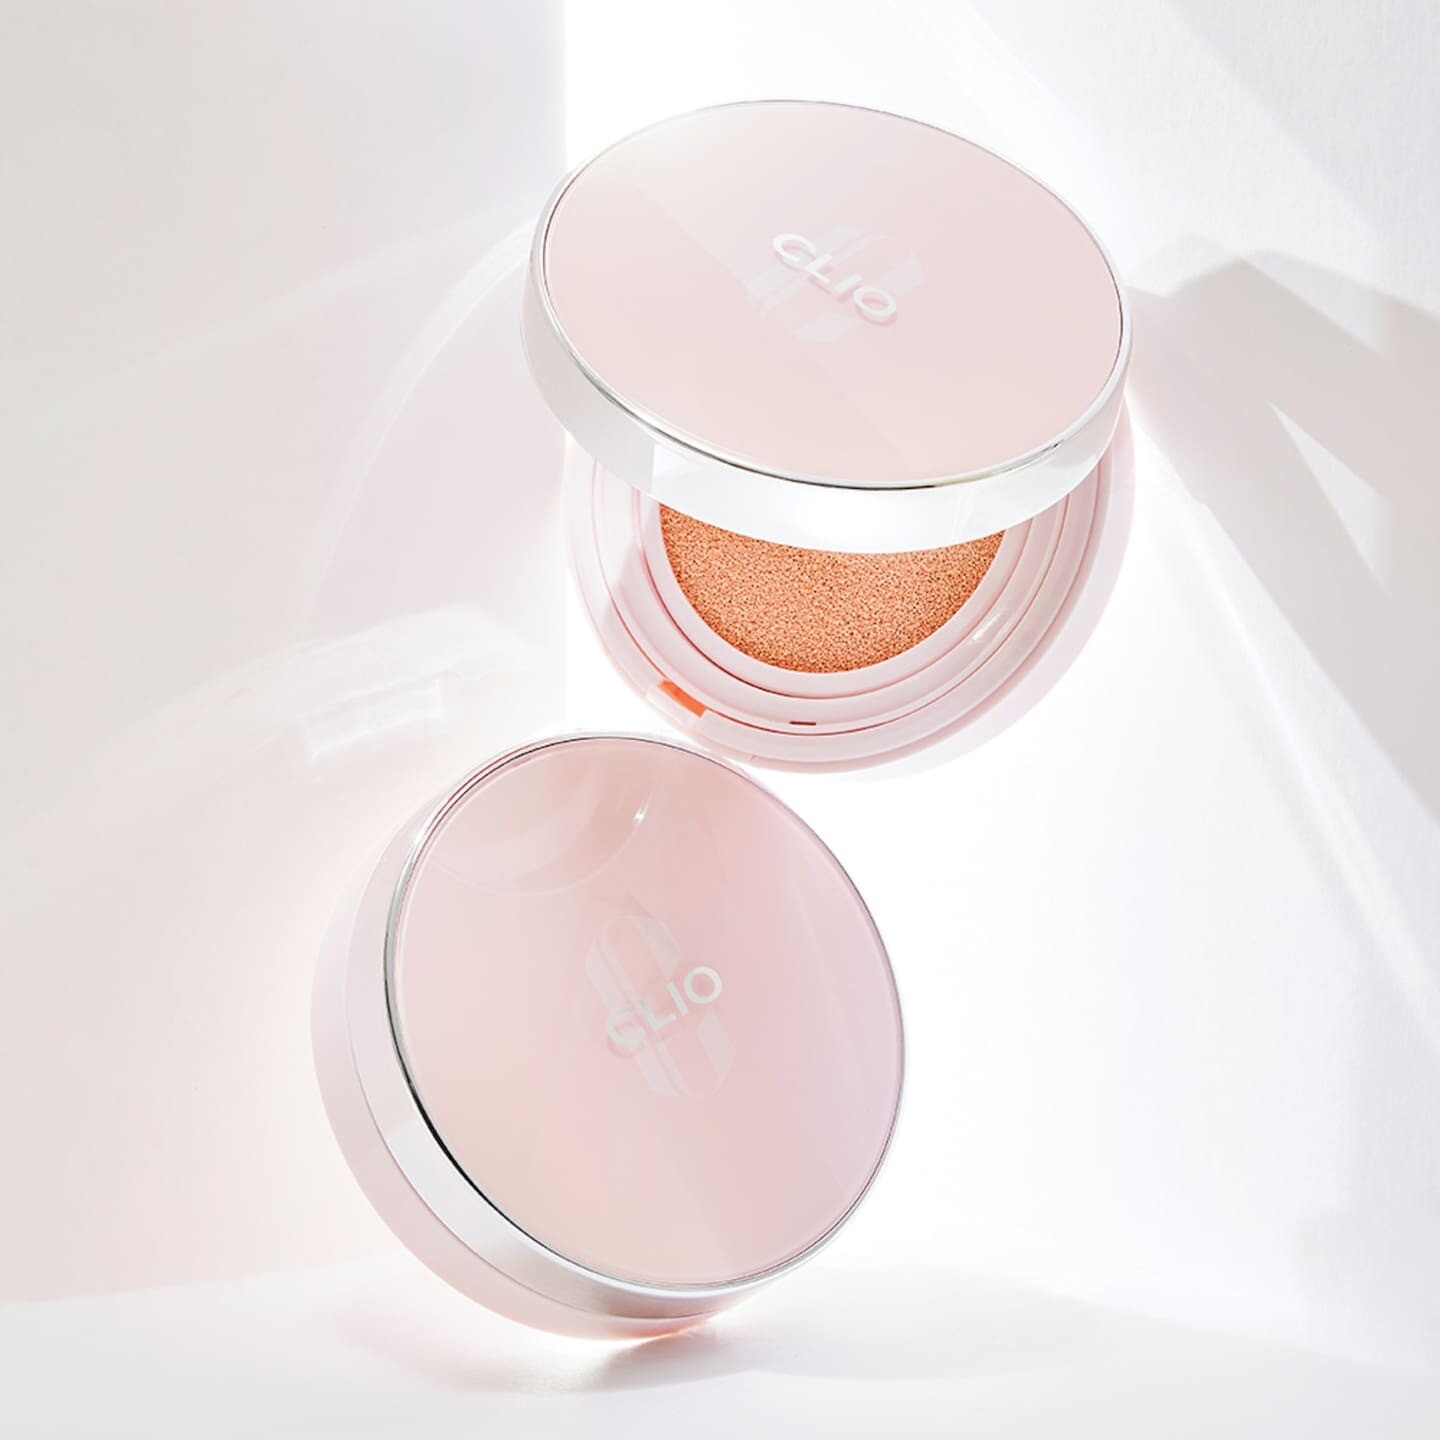 Clio Stay Perfect Tone up Cushion